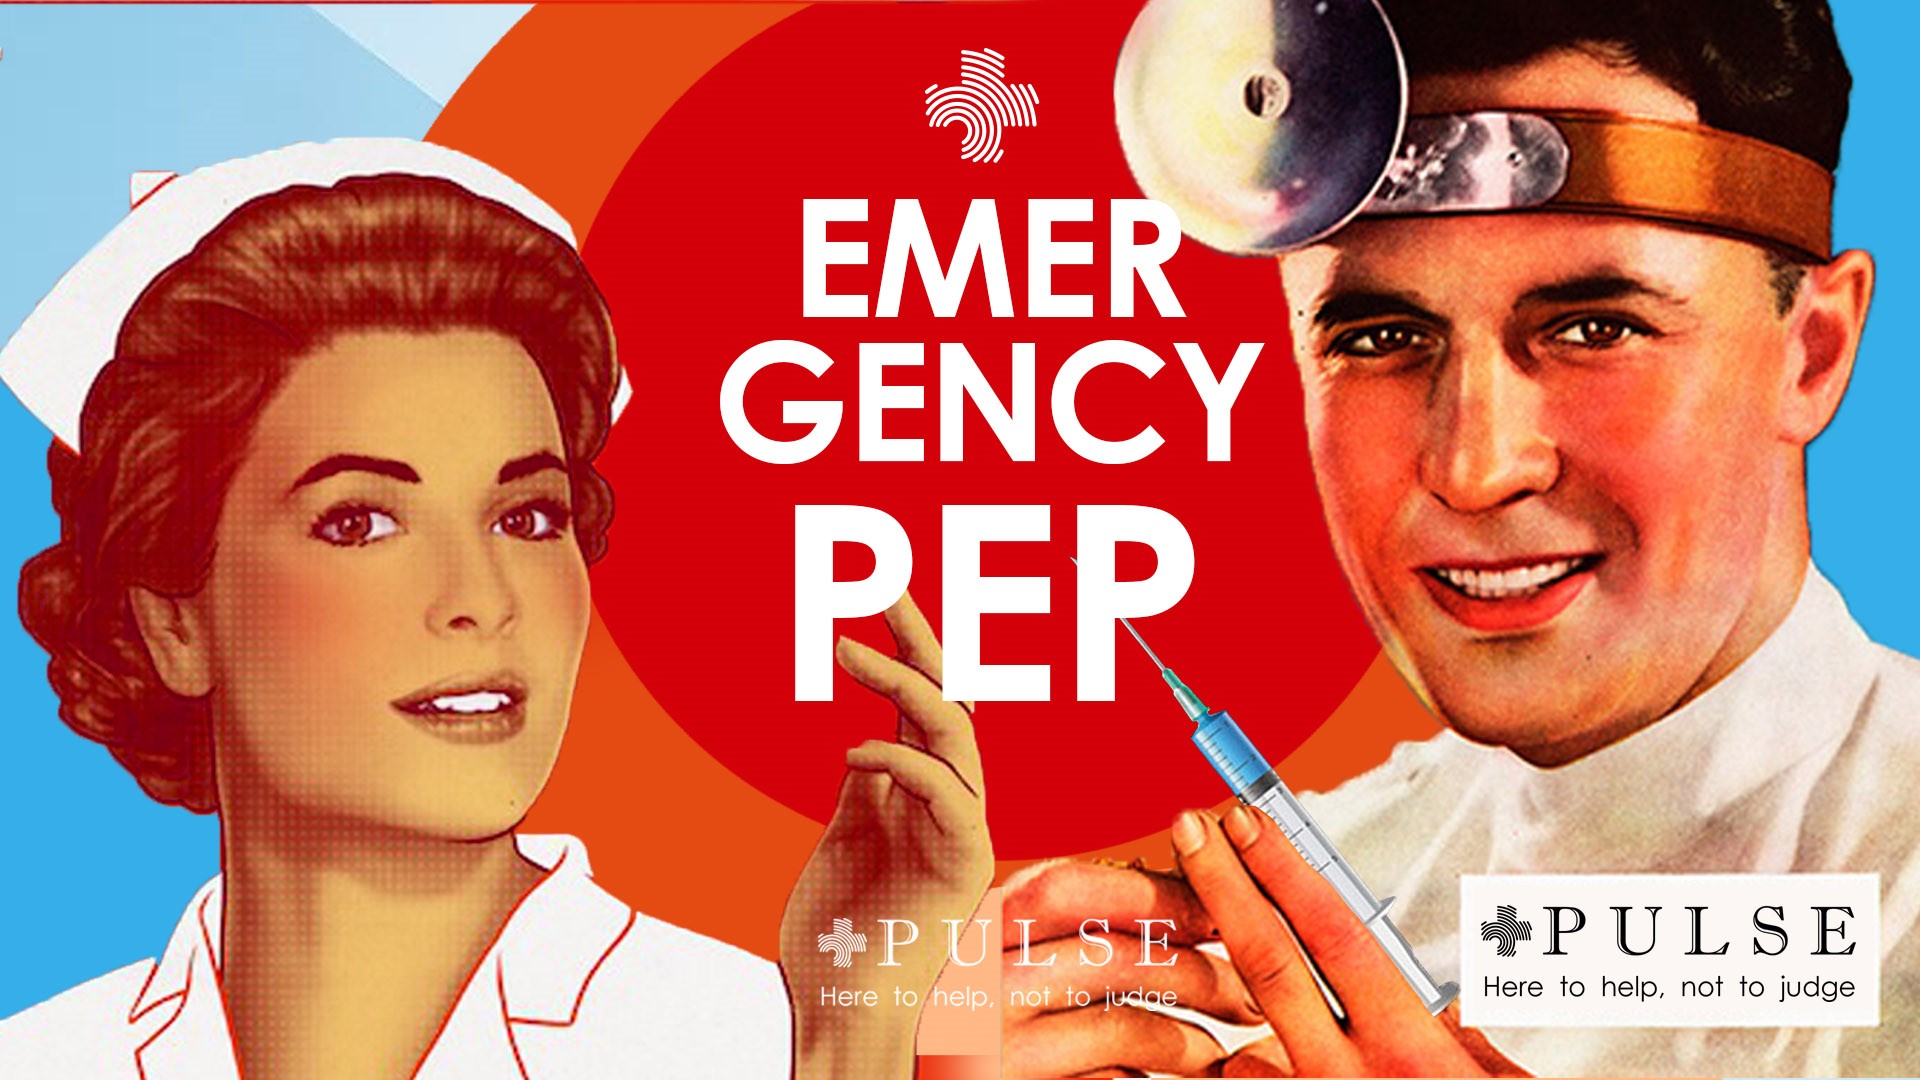 PEP FAQ - Frequently Asked Questions about Emergency PEP